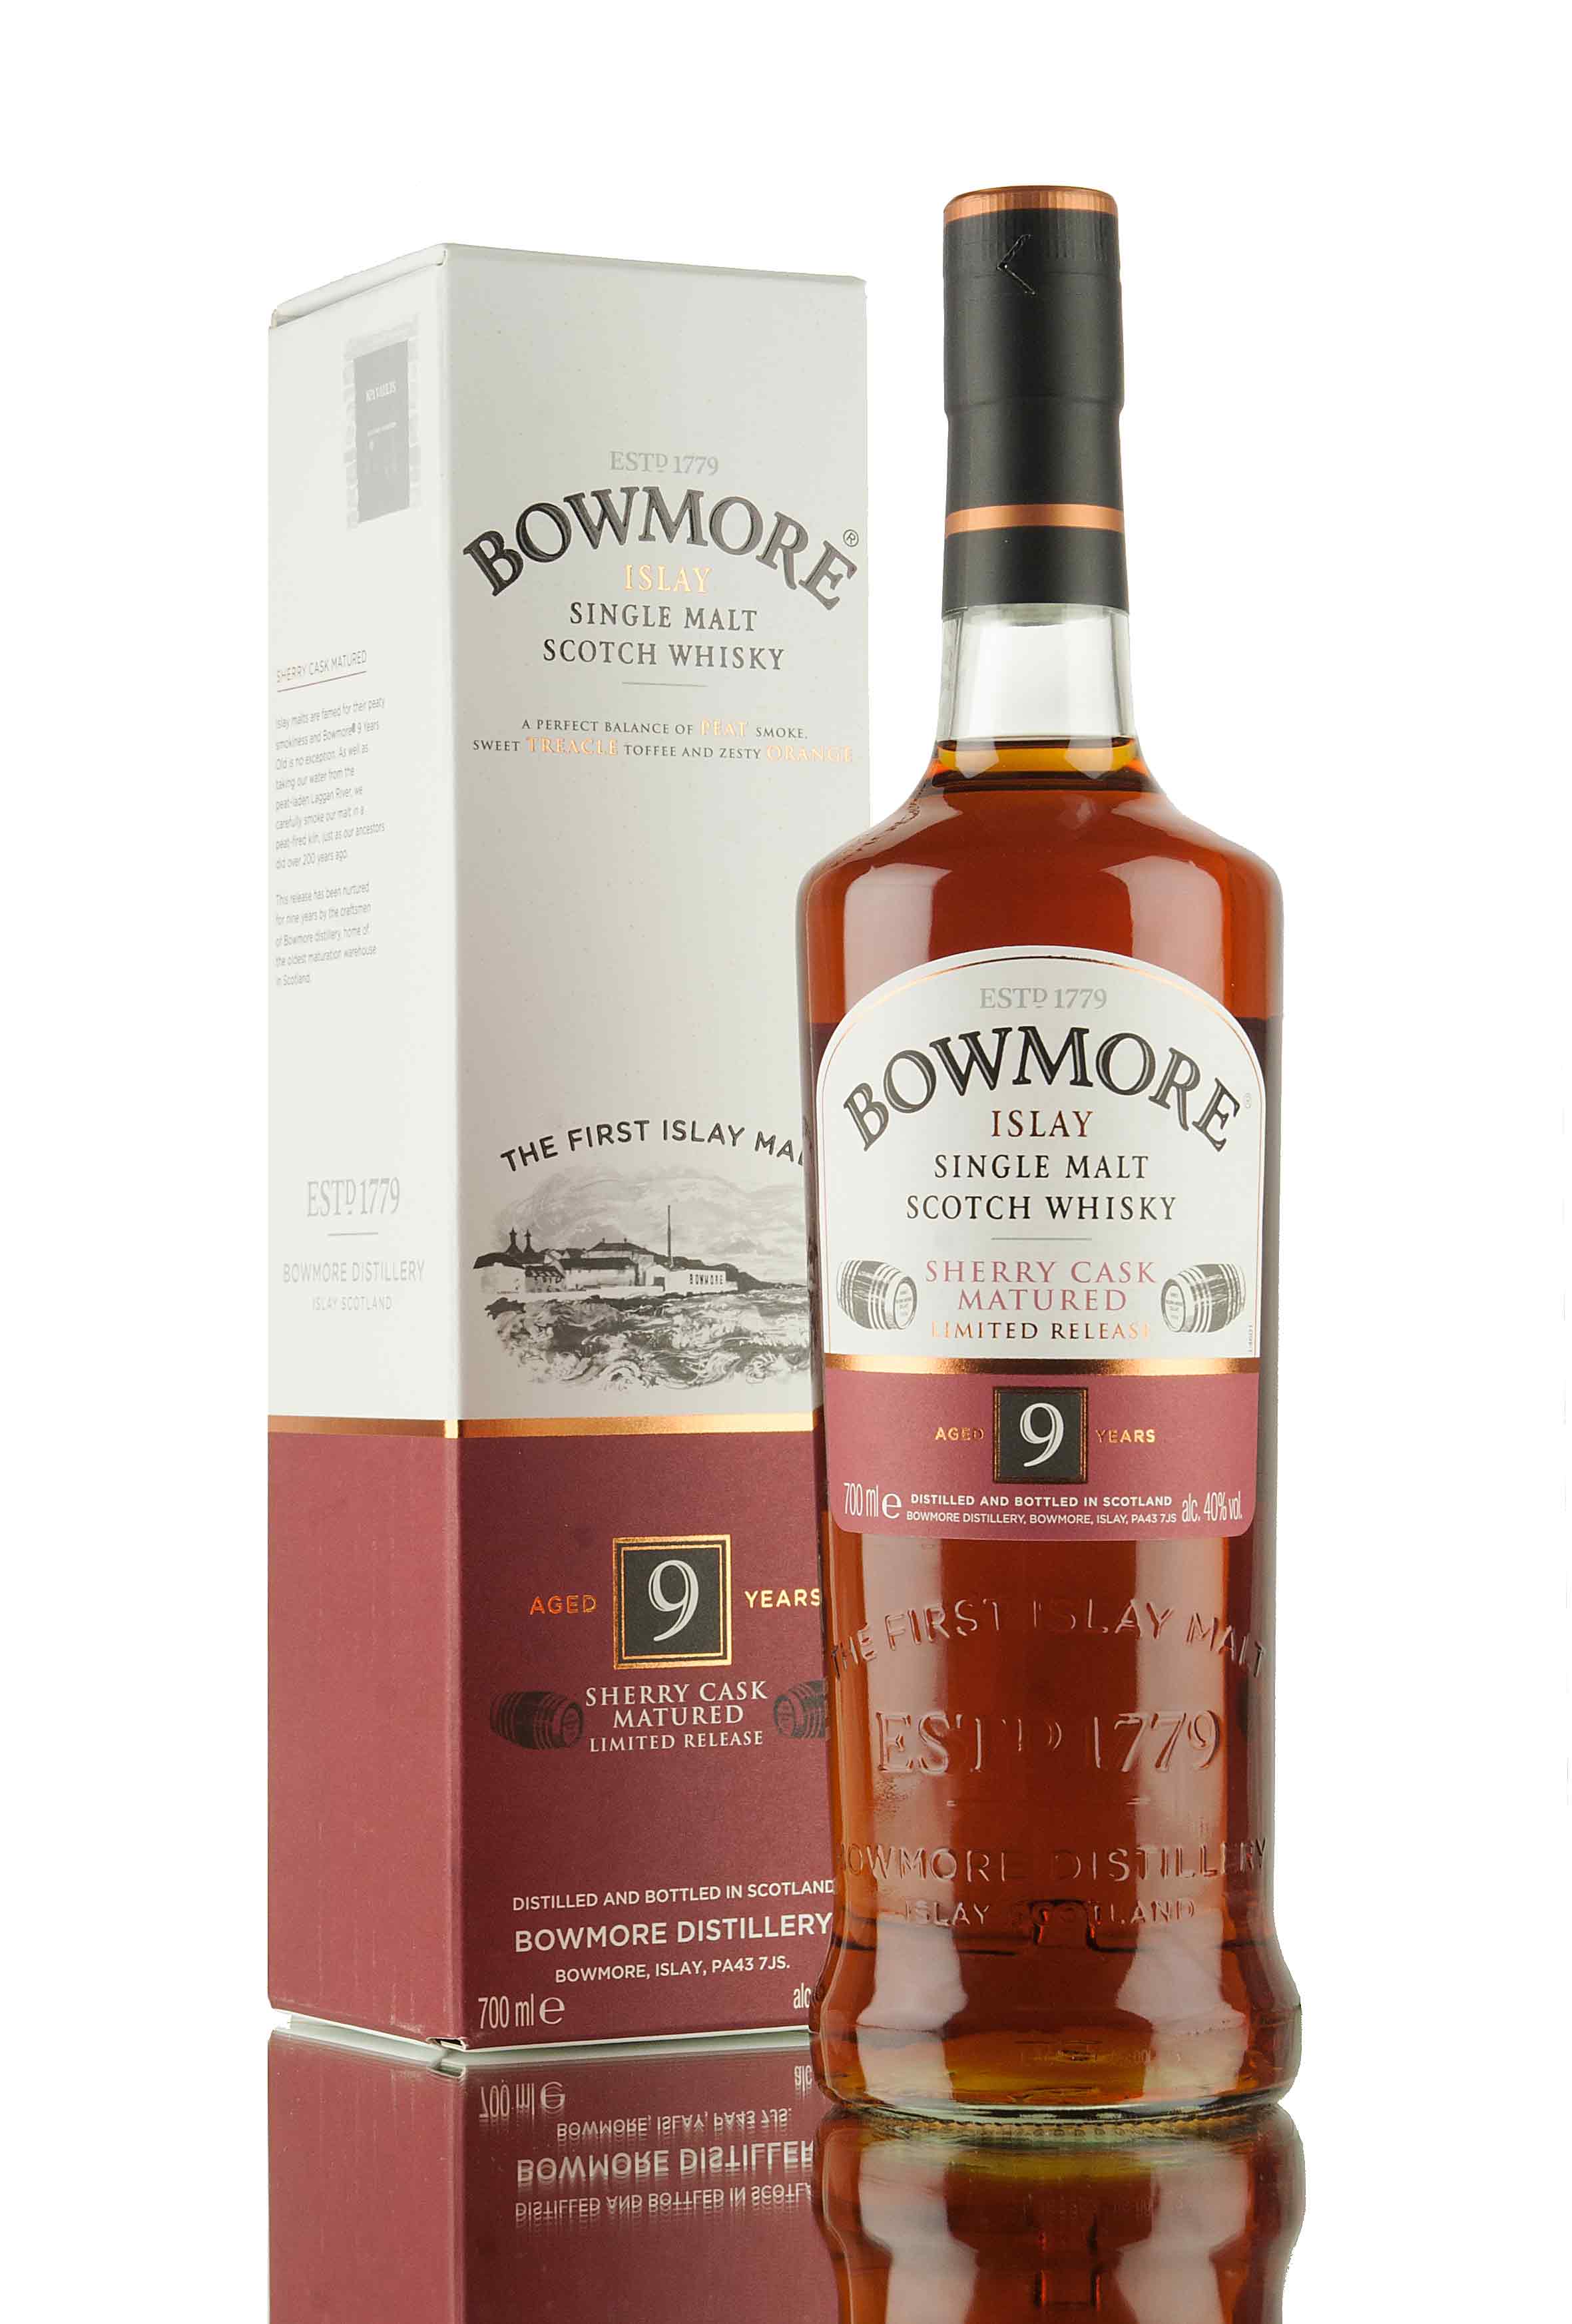 Bowmore 9 Year Old Sherry Cask Matured